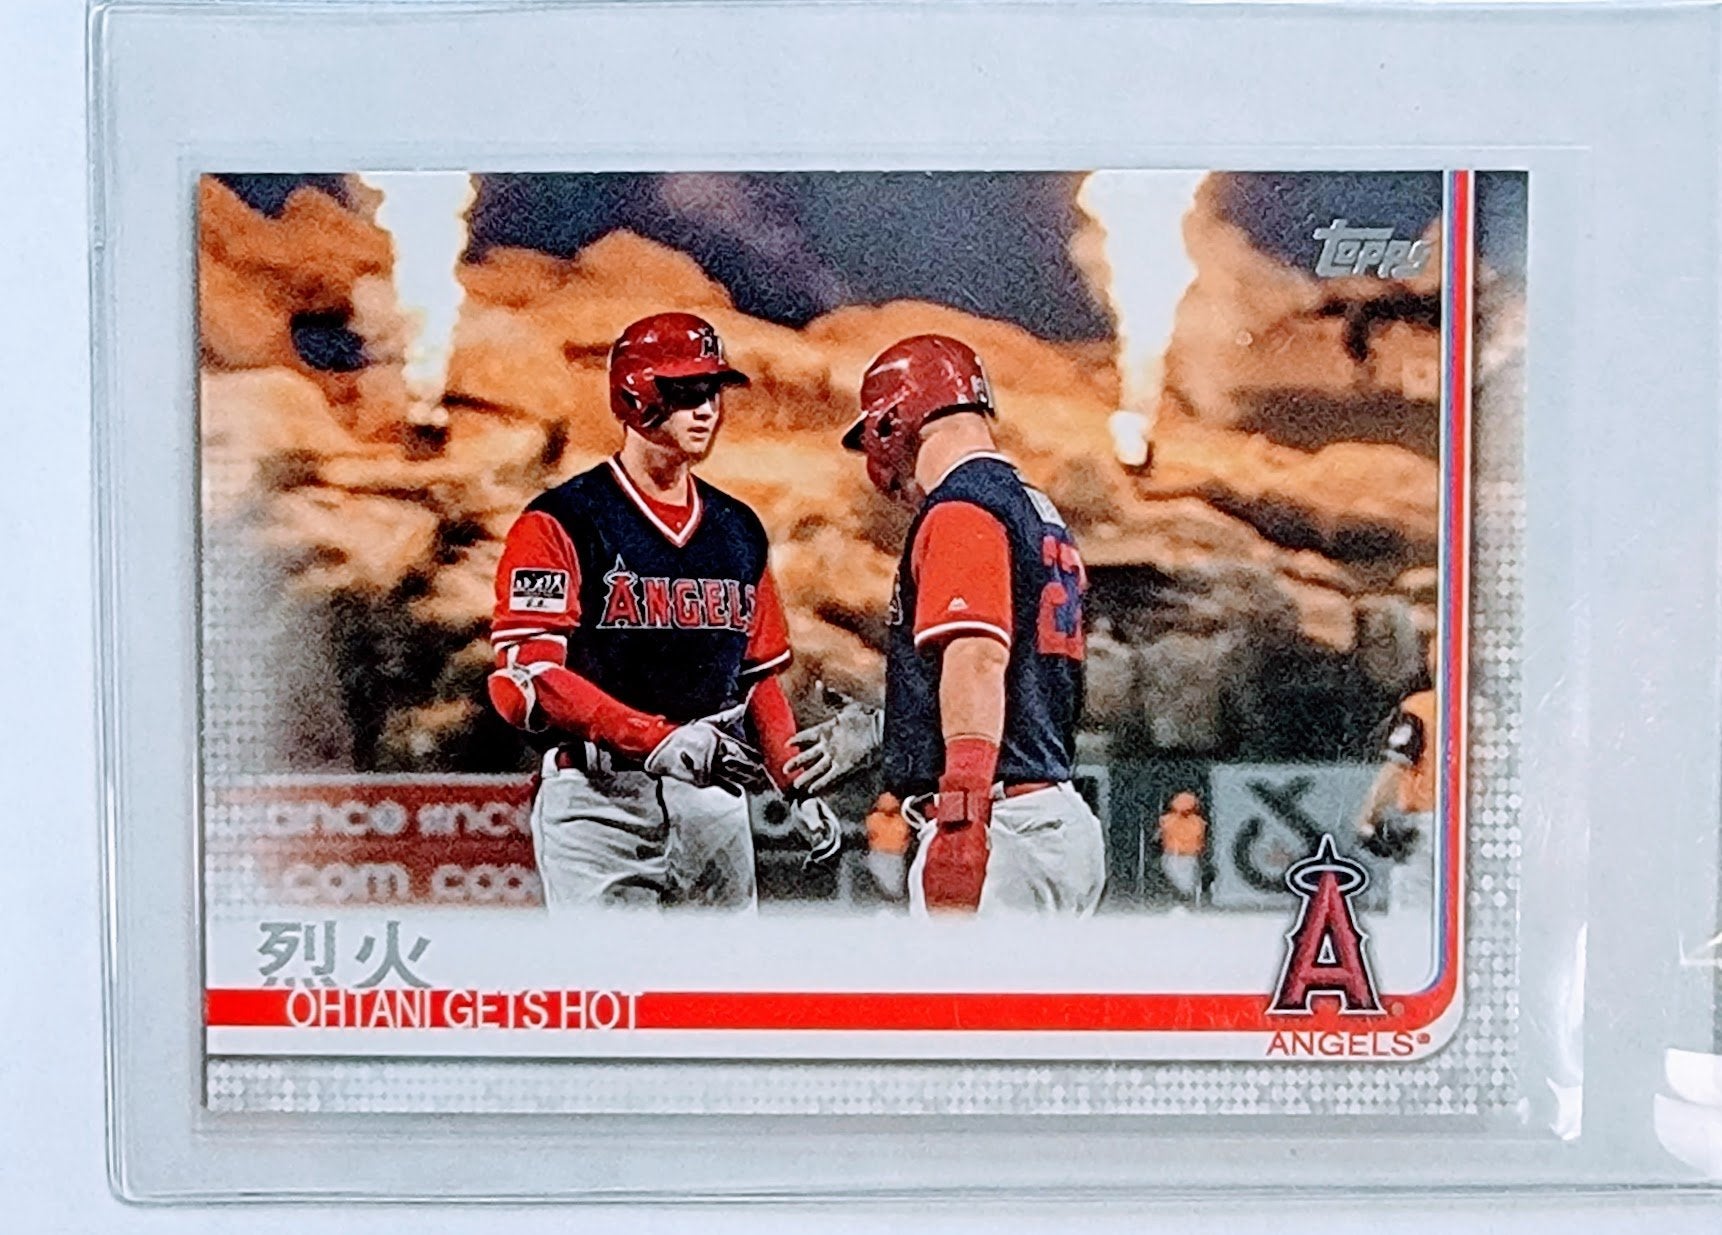 2019 Topps Shohei Ohtani Gets Hot 烈火 SP w/Mike Trout Baseball Trading Card TPTV simple Xclusive Collectibles   